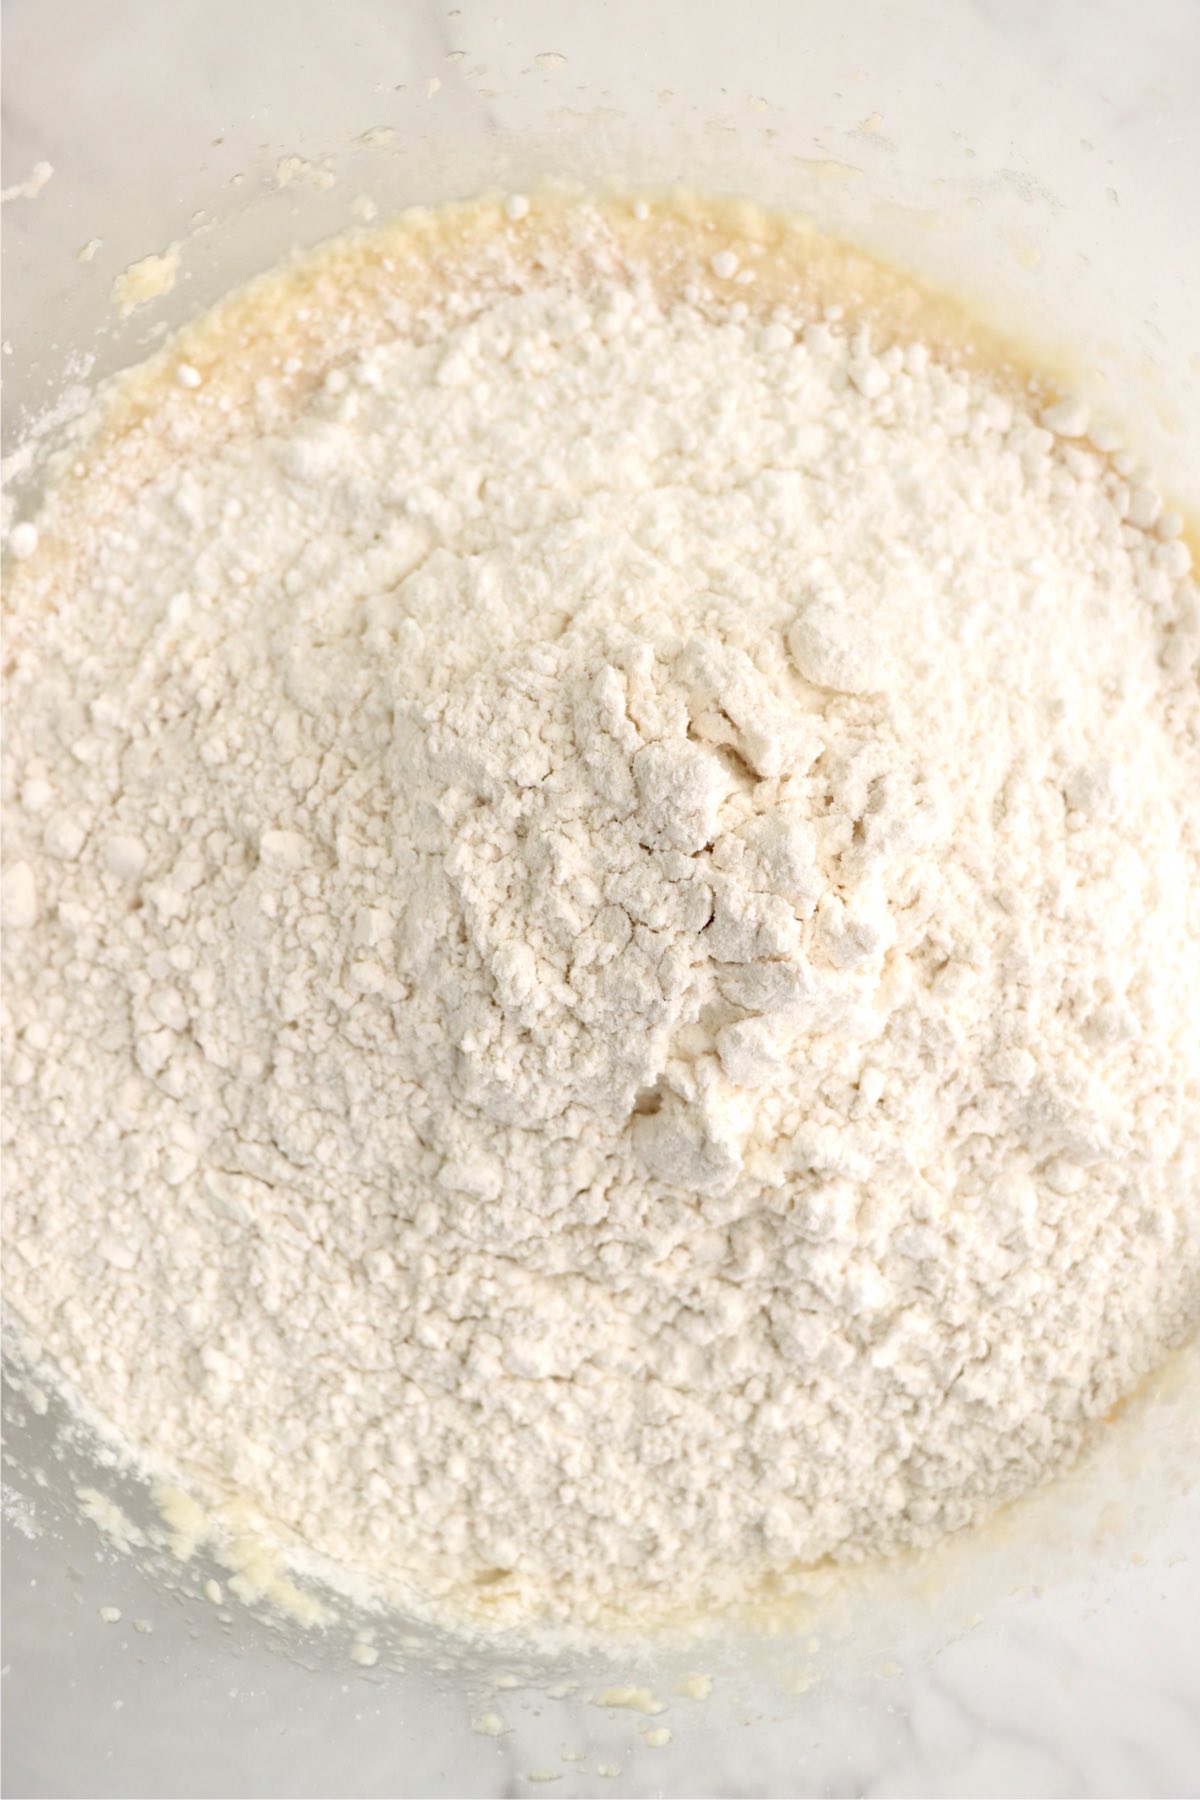 White cake mix and flour in a mixing bowl